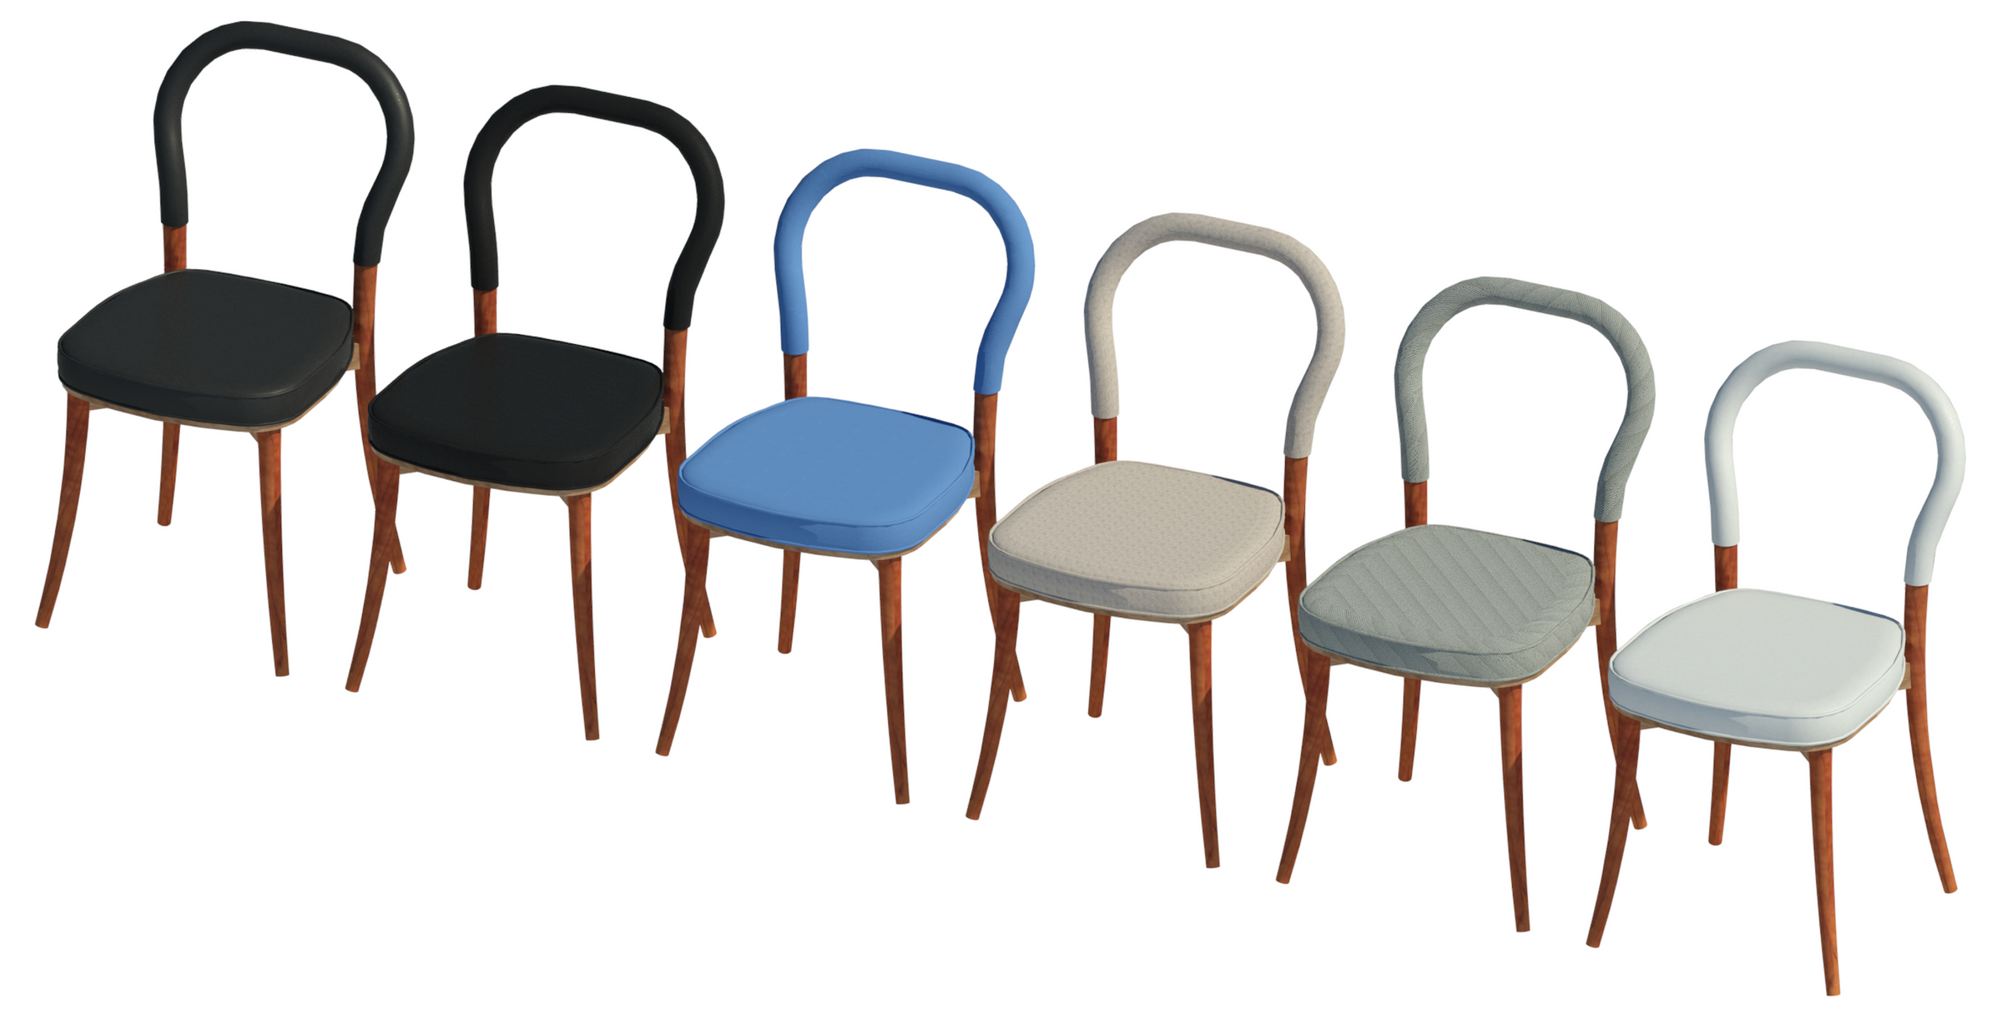 Revit family of the Göteborg Chair showing six upholstery finishes.